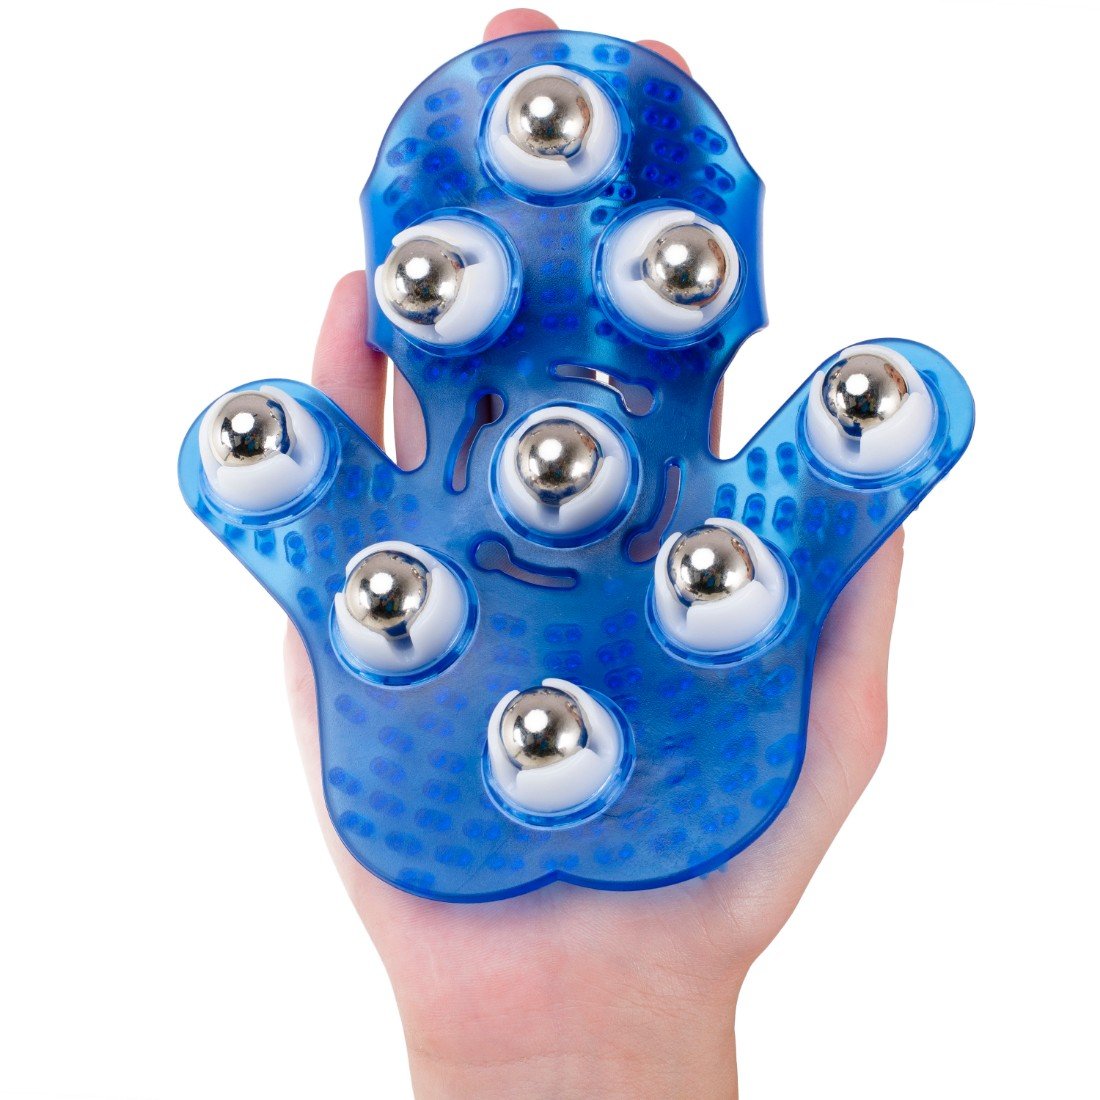 Importikaah-Palm-Shaped-Glove-body-massager-metal-roller